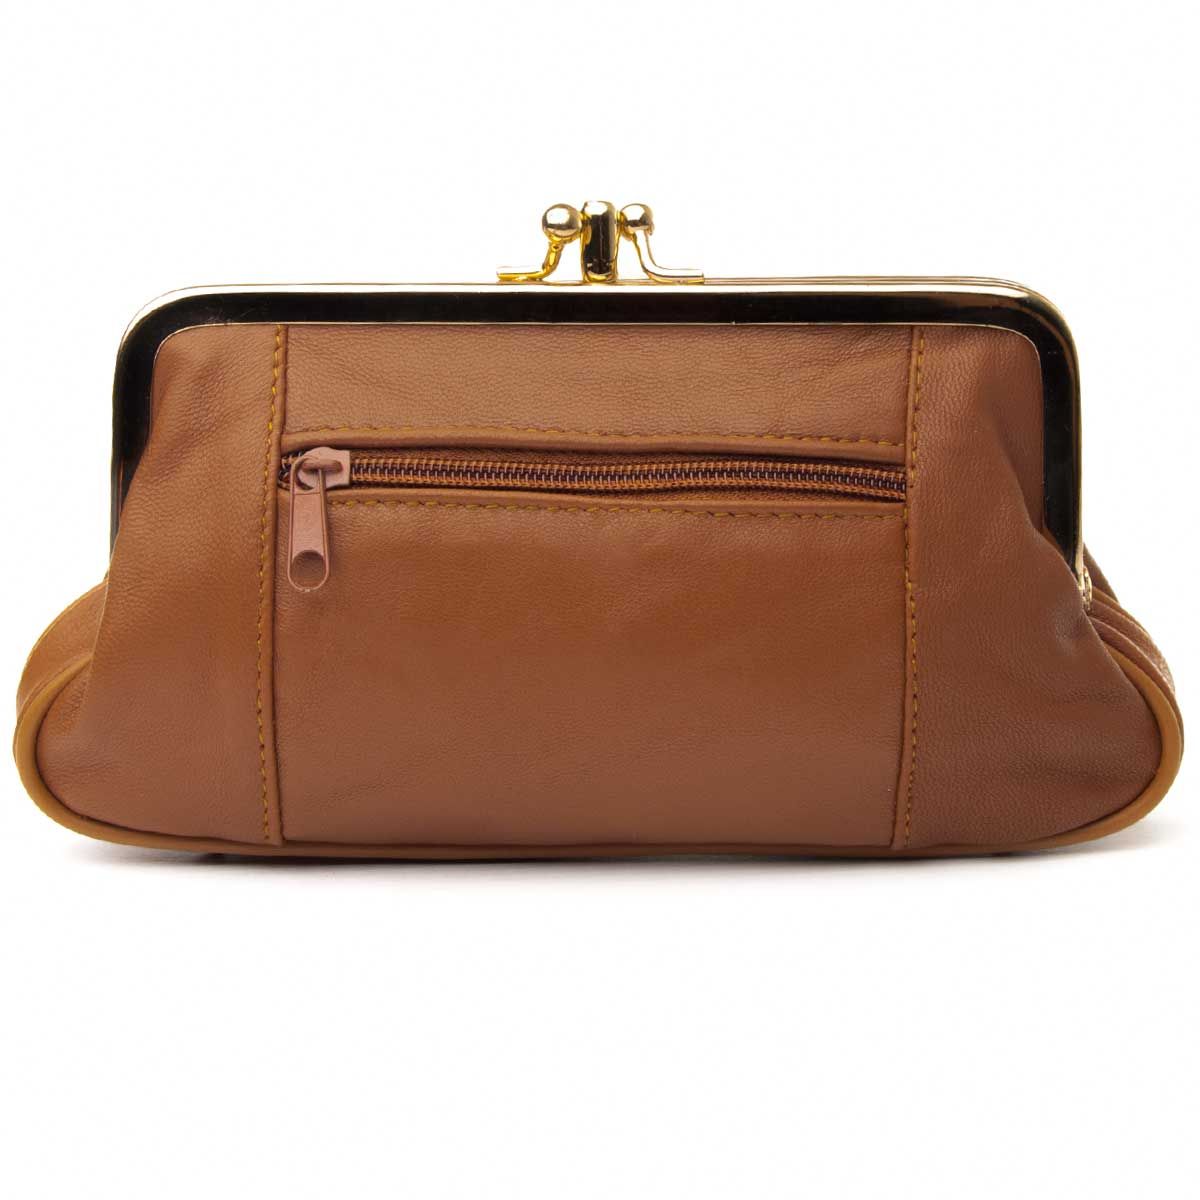 Measure: 10 * 17 * 2 cm. Women's purse, made of leather with closure closure. It is very flexible and comes doubly sewn. It has two exterior pockets with zip and two independent interior departments, lined with textiles. Very practical and comfortable. 100% natural skin.